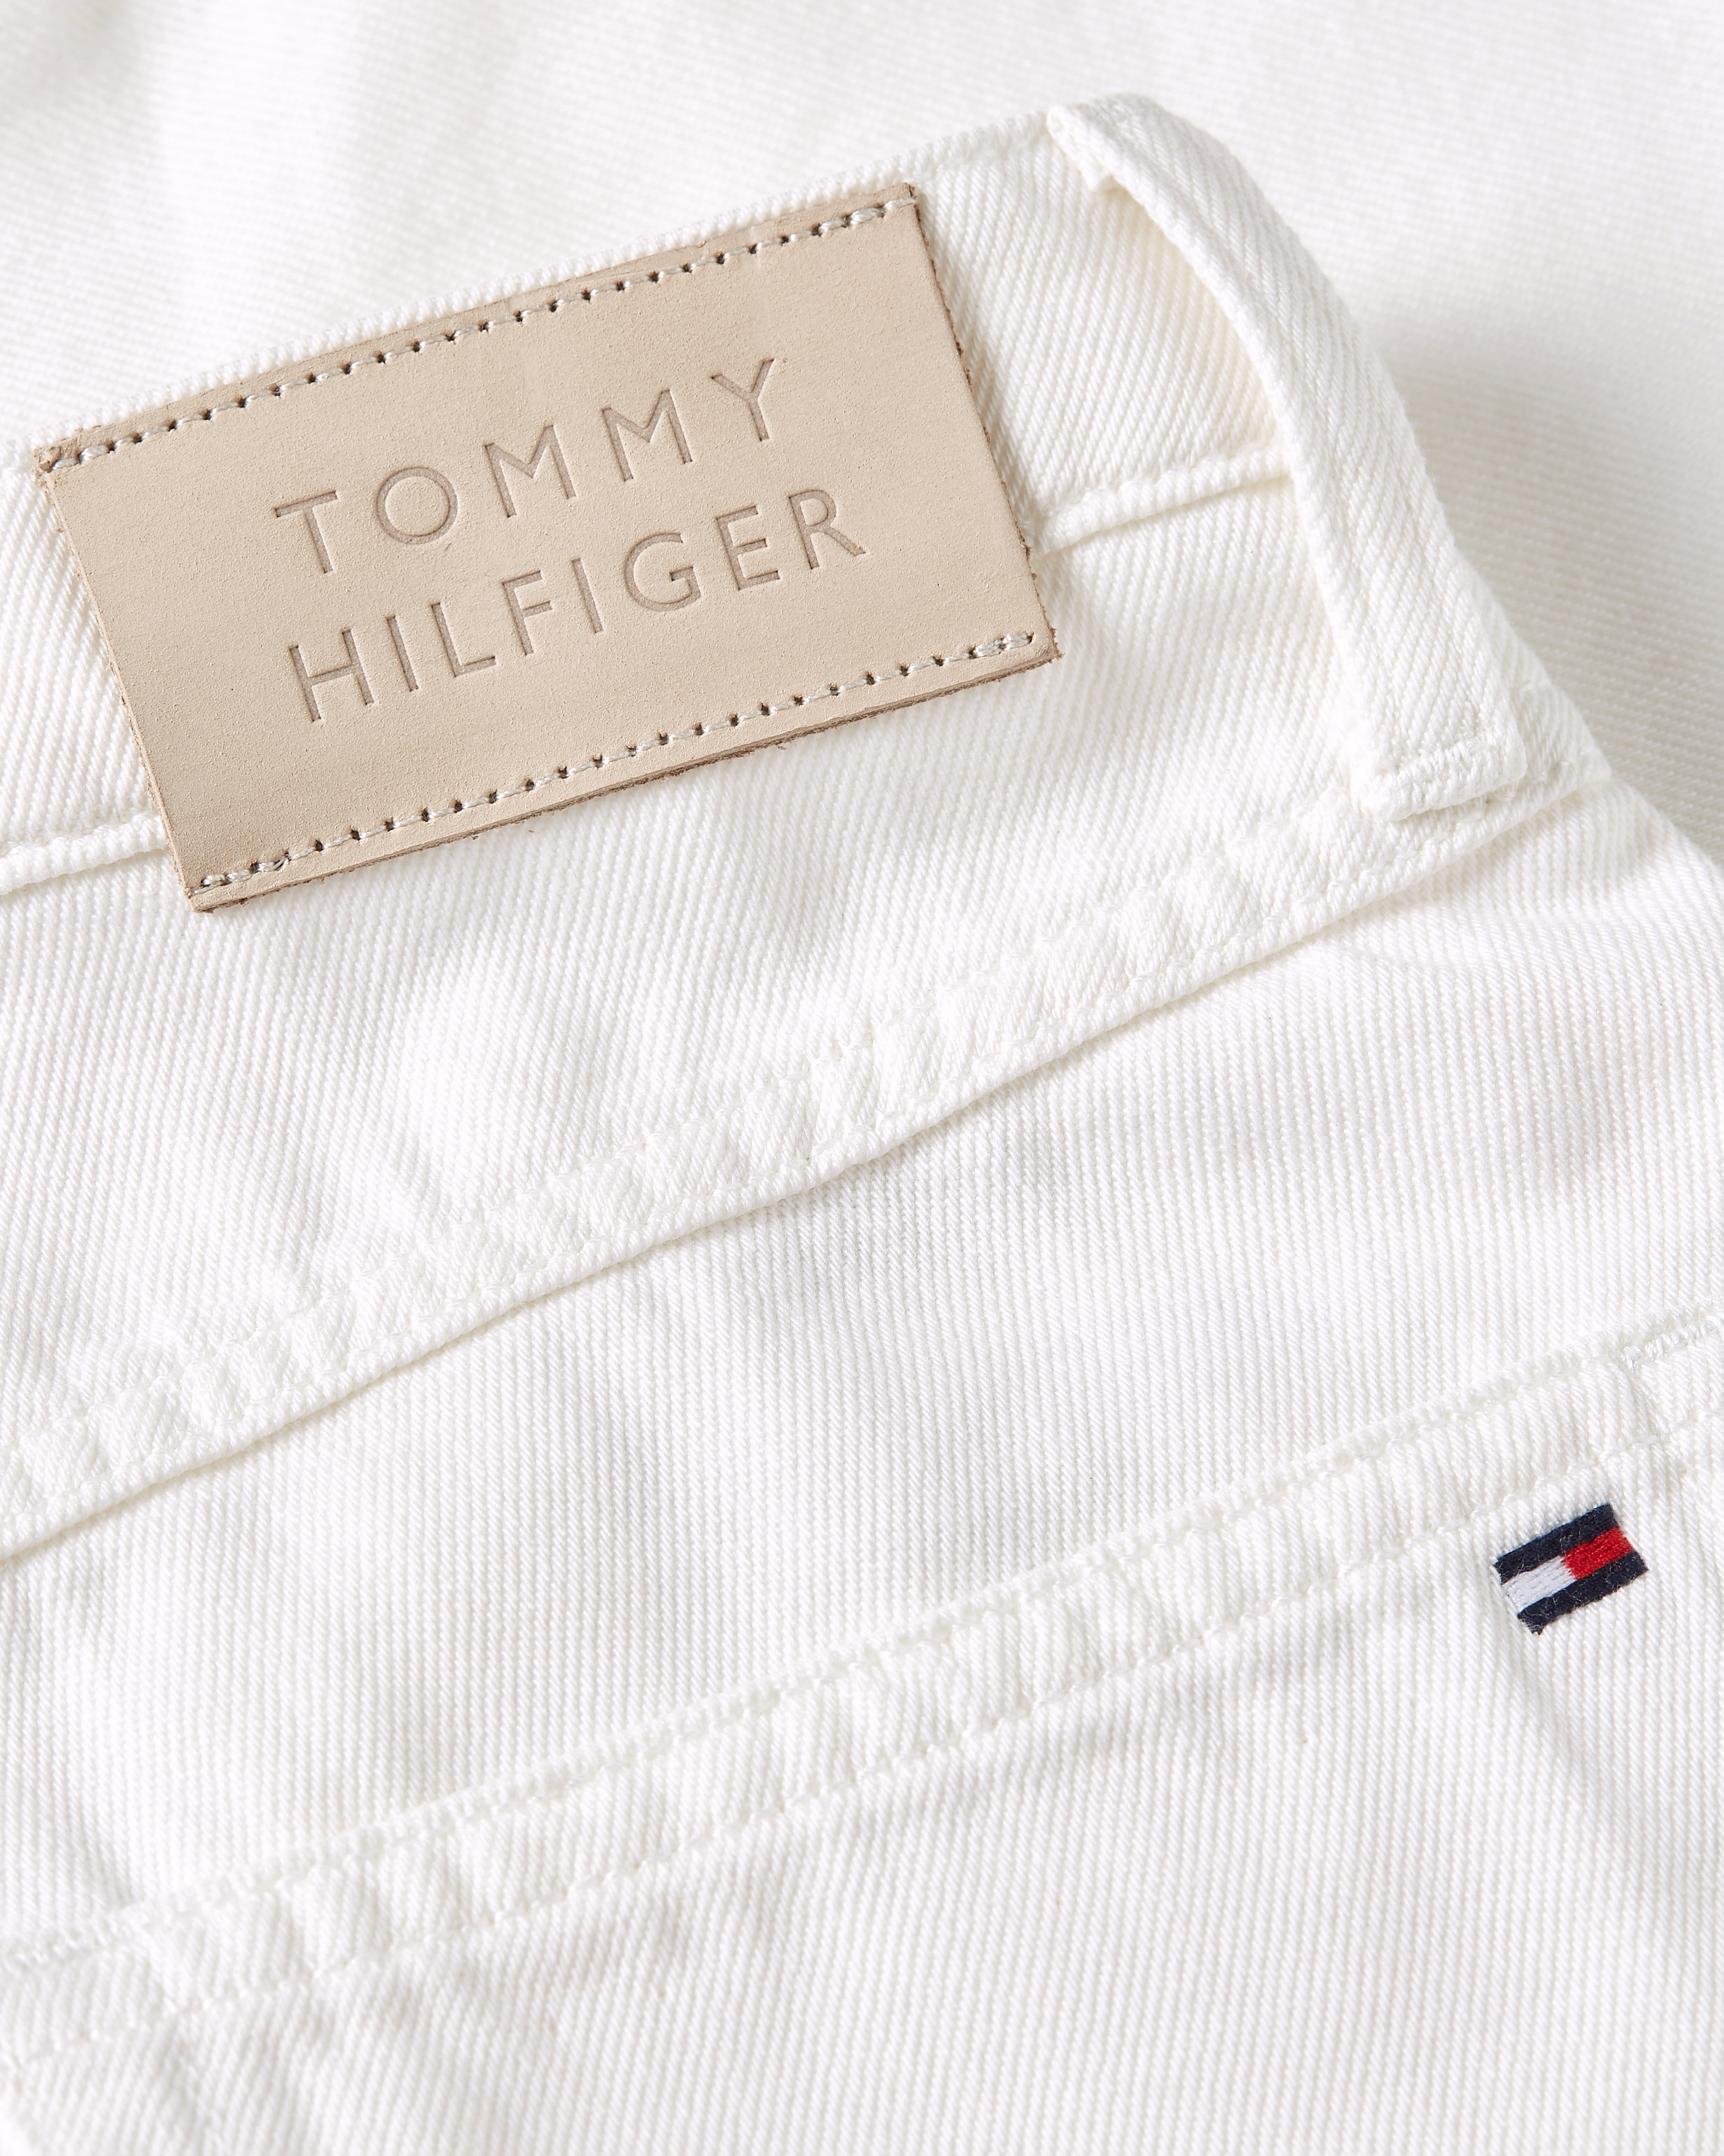 Tommy Hilfiger New Classic Straight Jeans